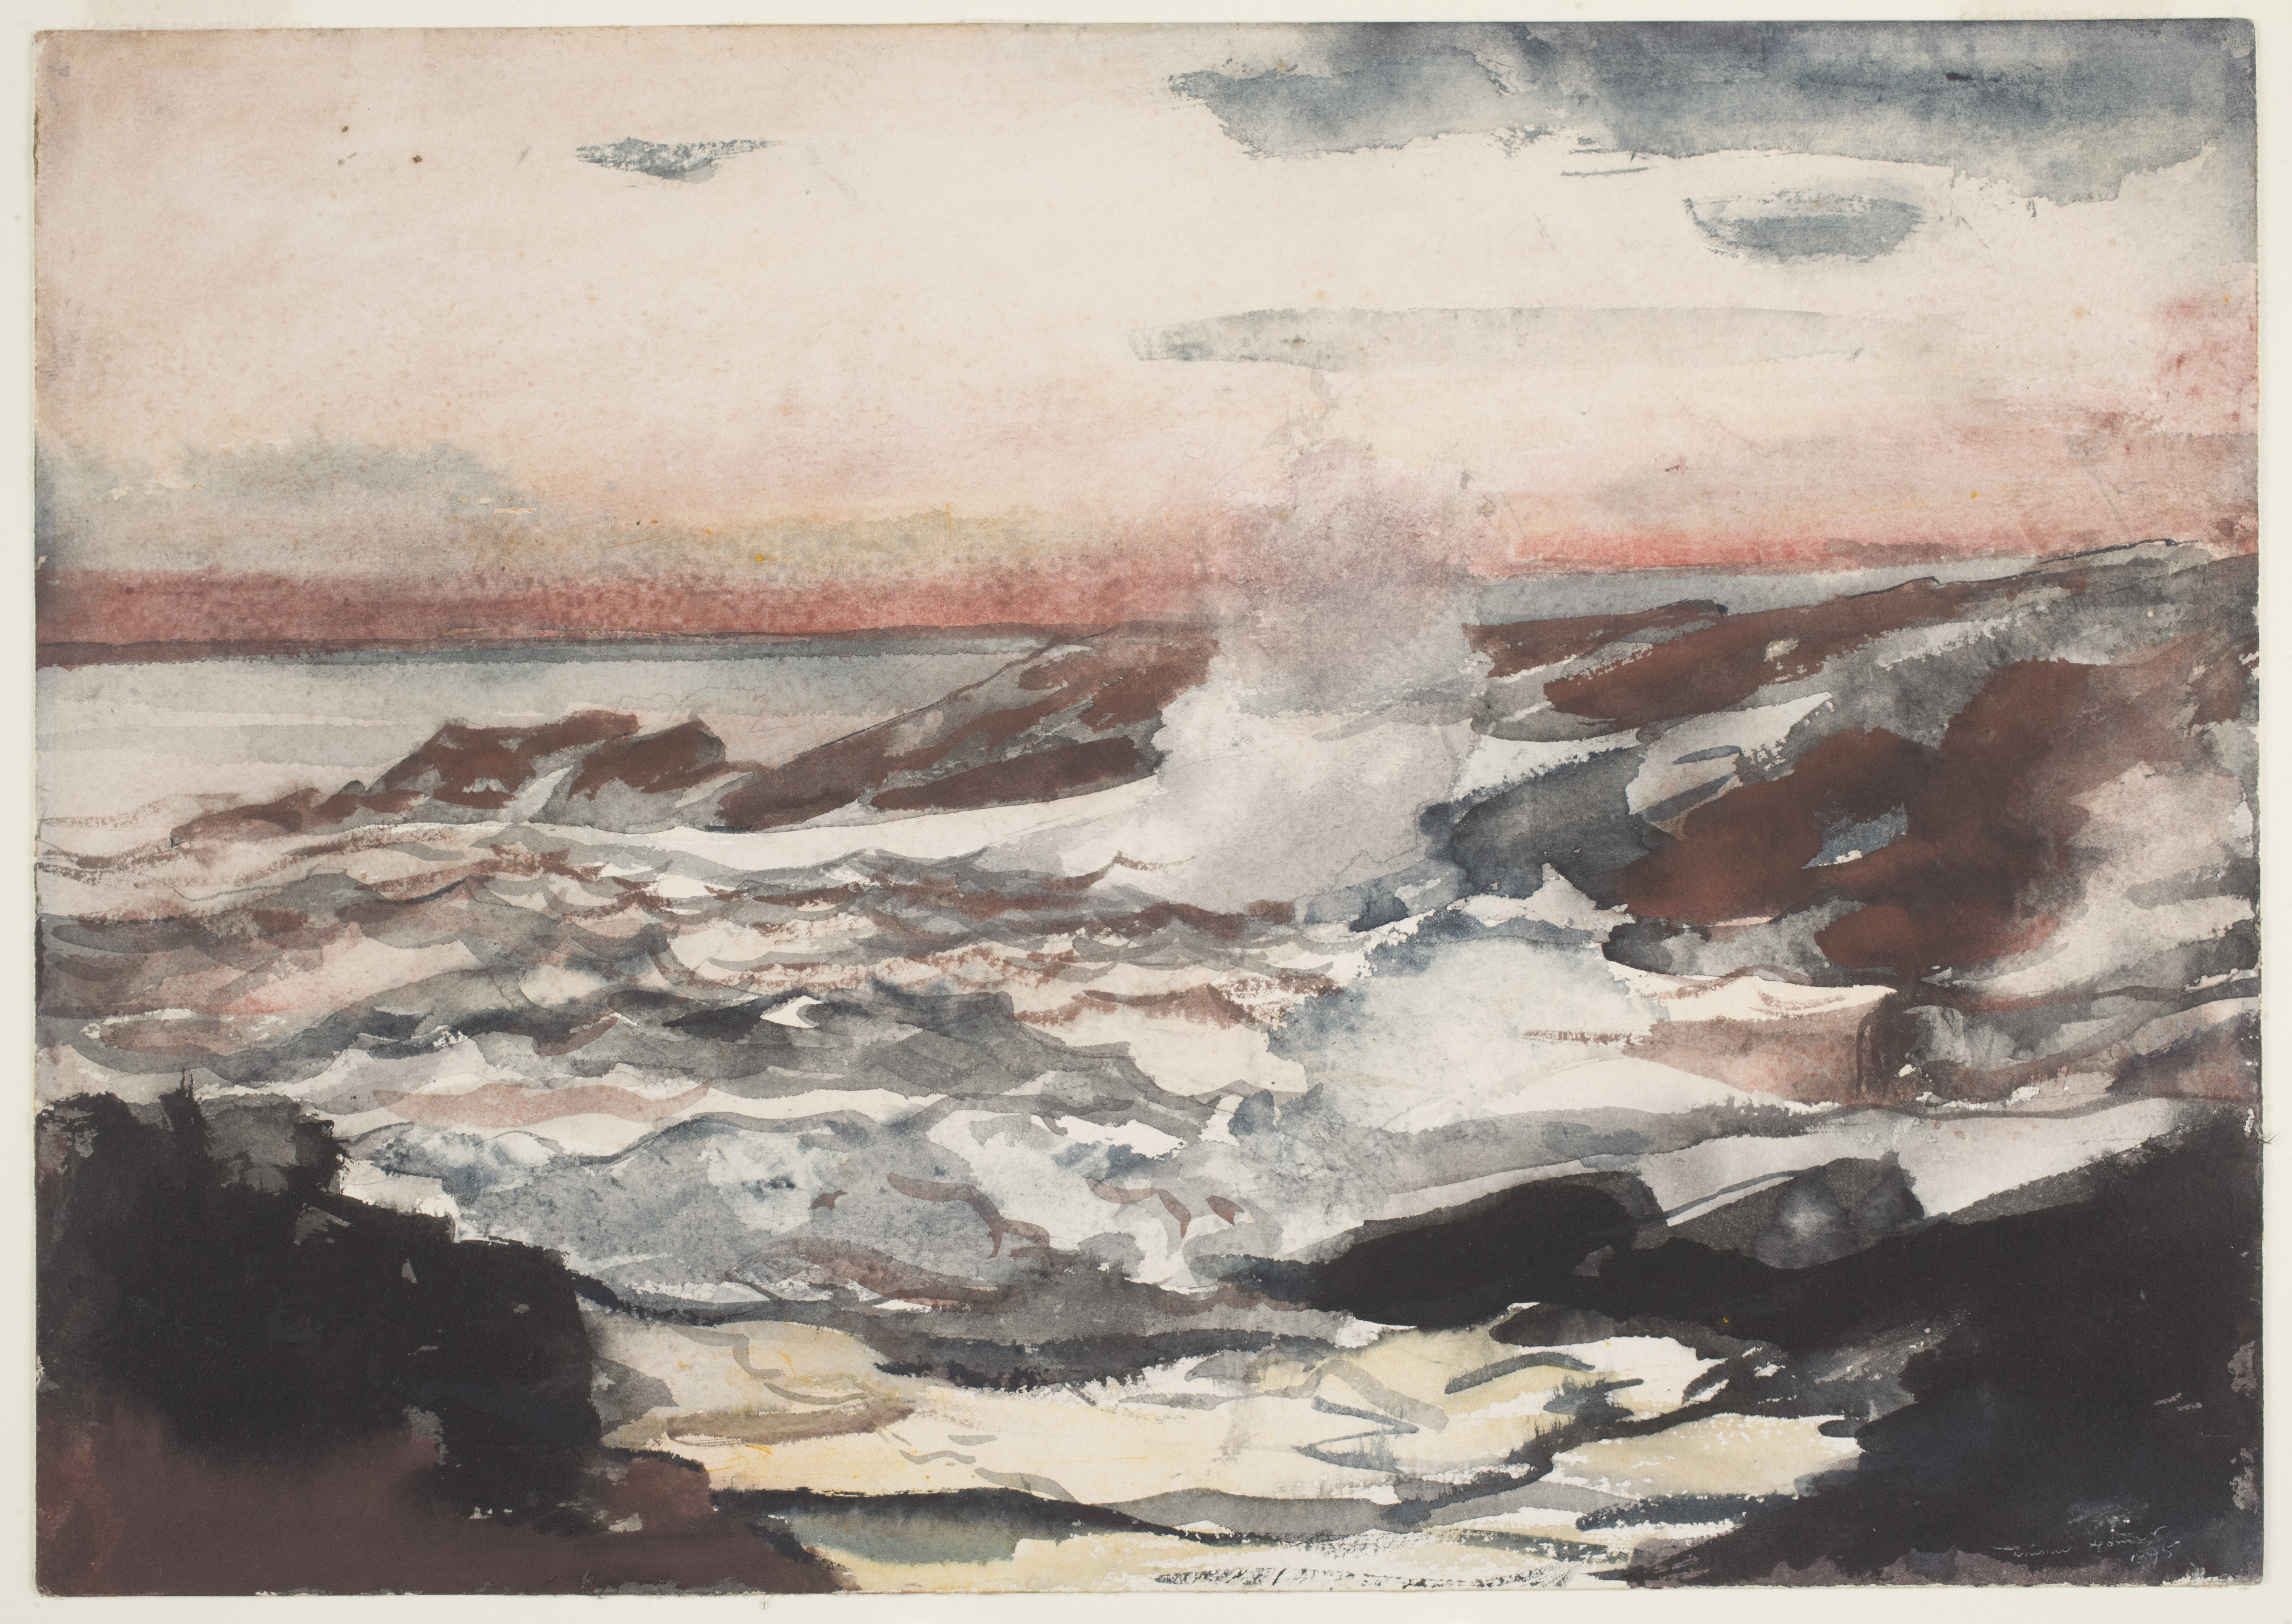 Winslow Homer, Prout's Neck, Surf on Rocks, 1895